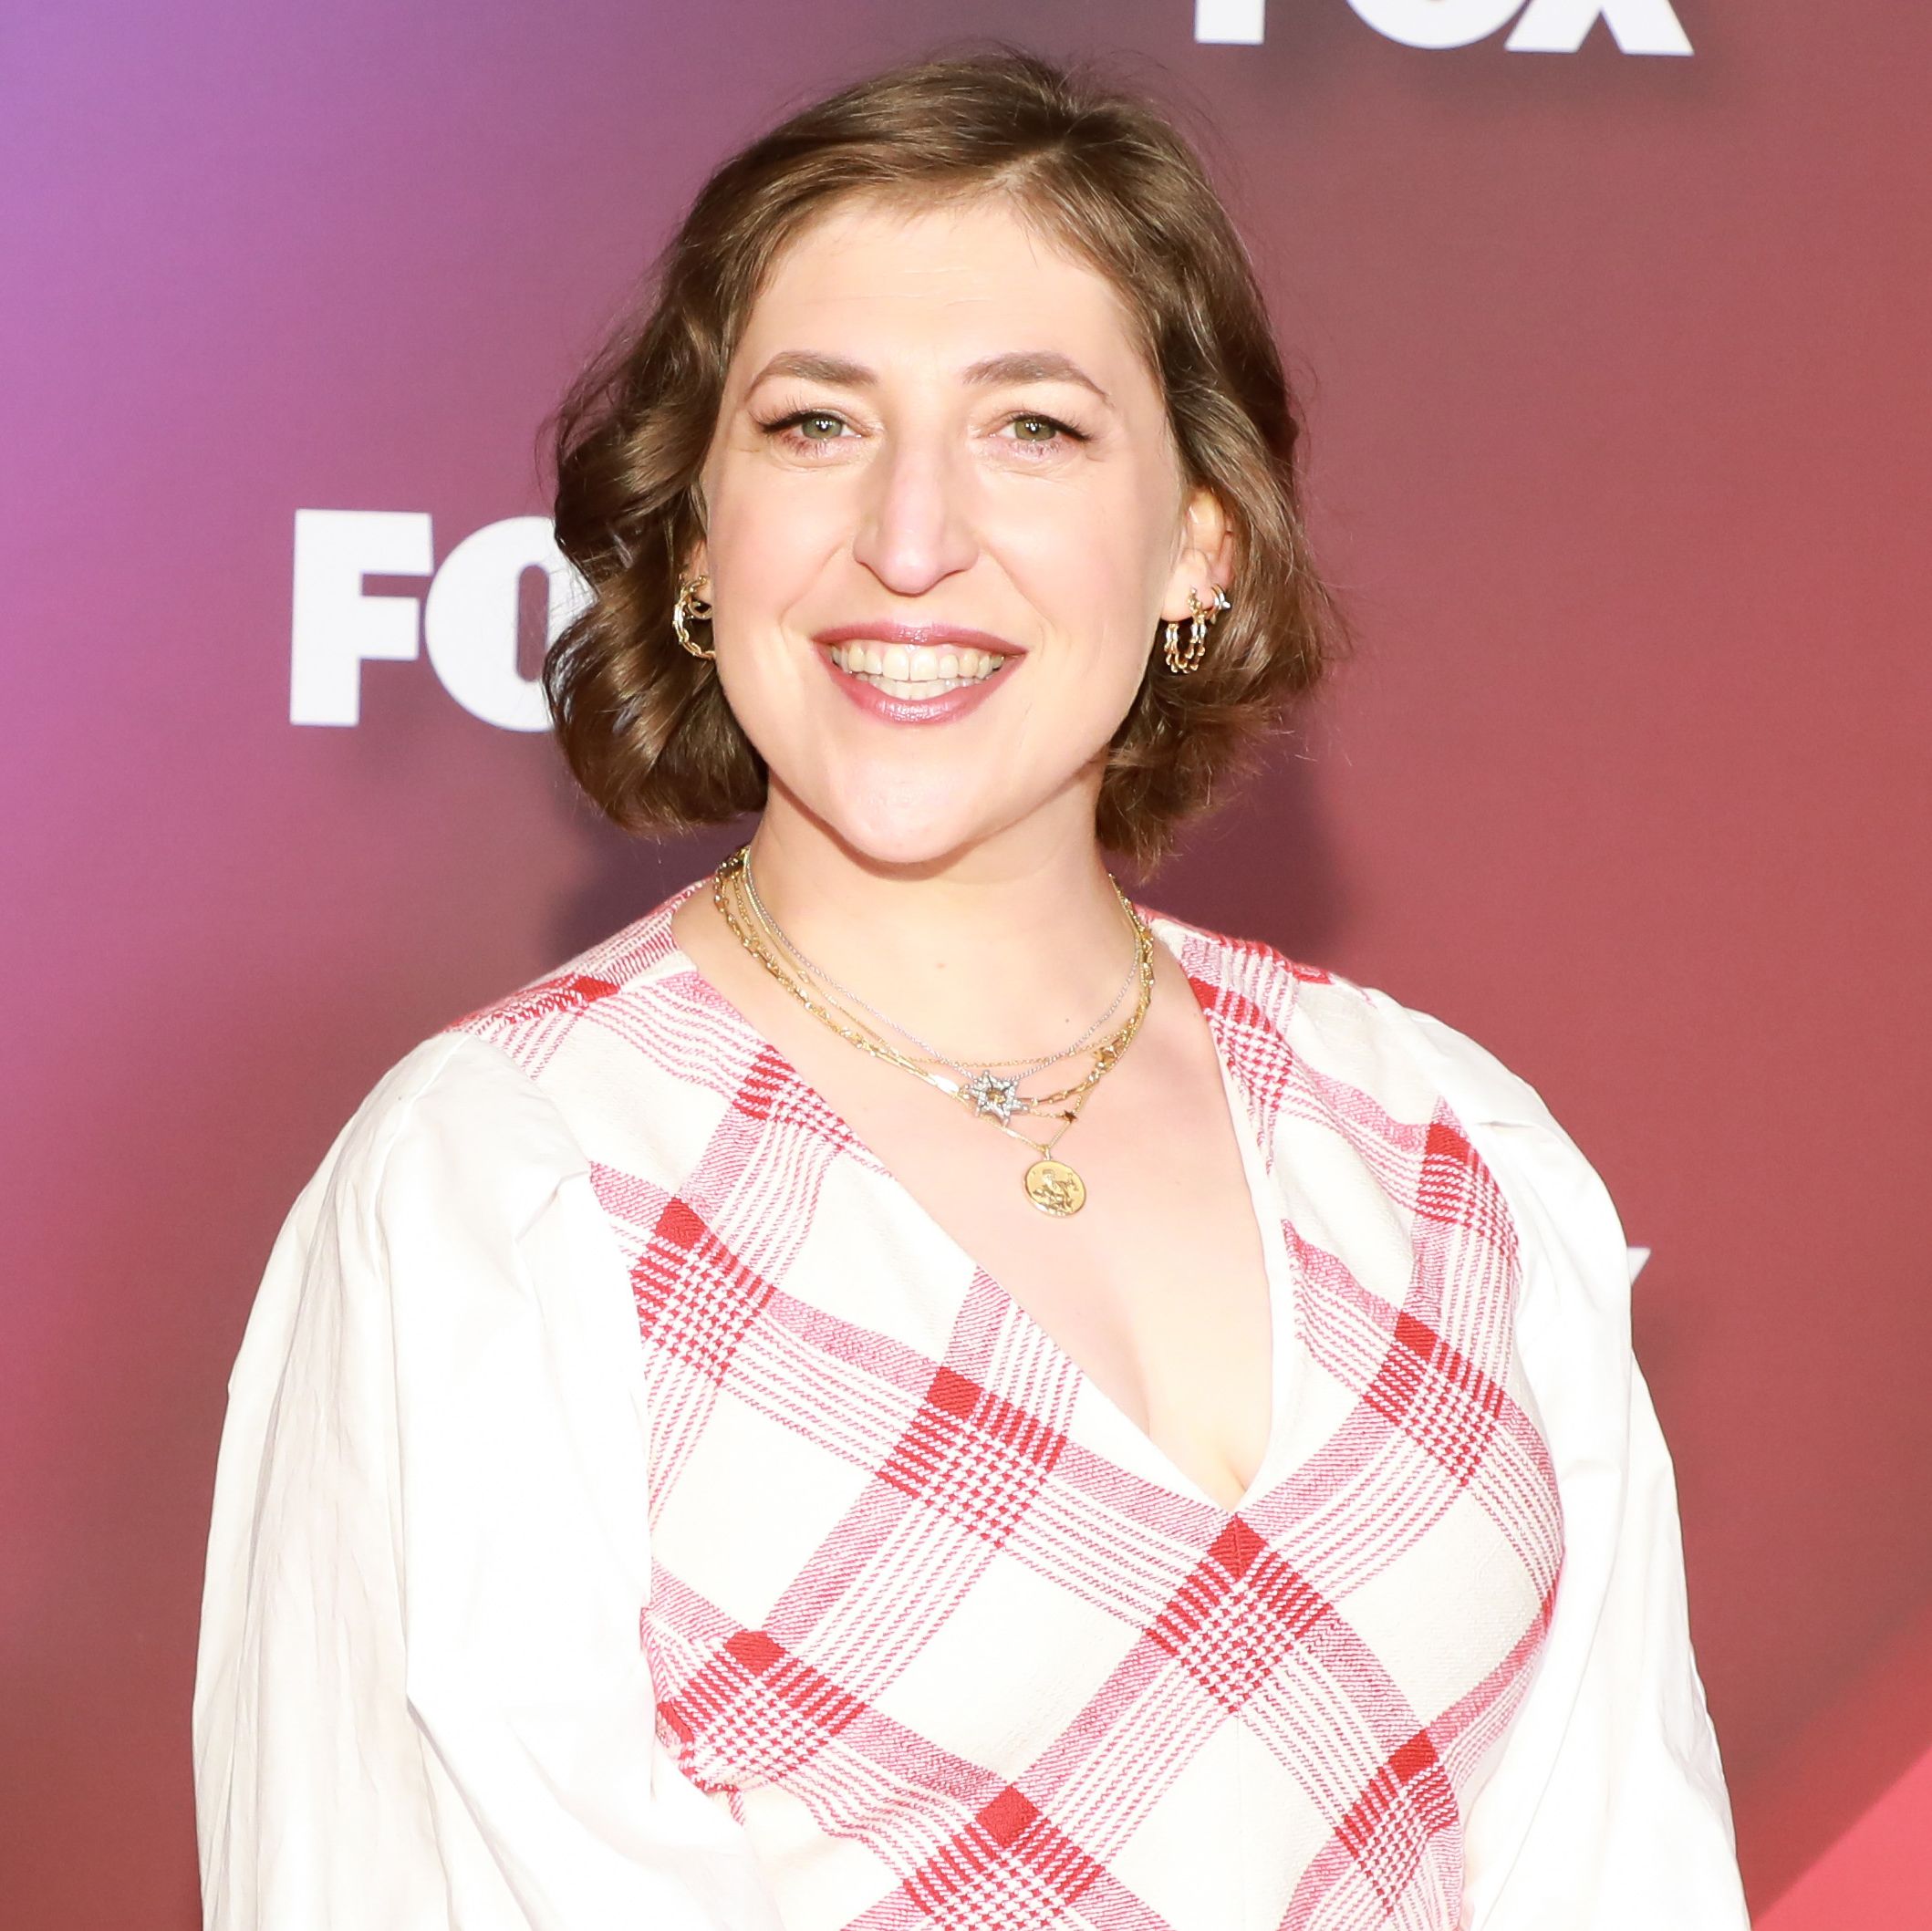 Mayim Bialik Says She 'Probably' Would've Asked for Plastic Surgery if She Had Social Media Growing Up